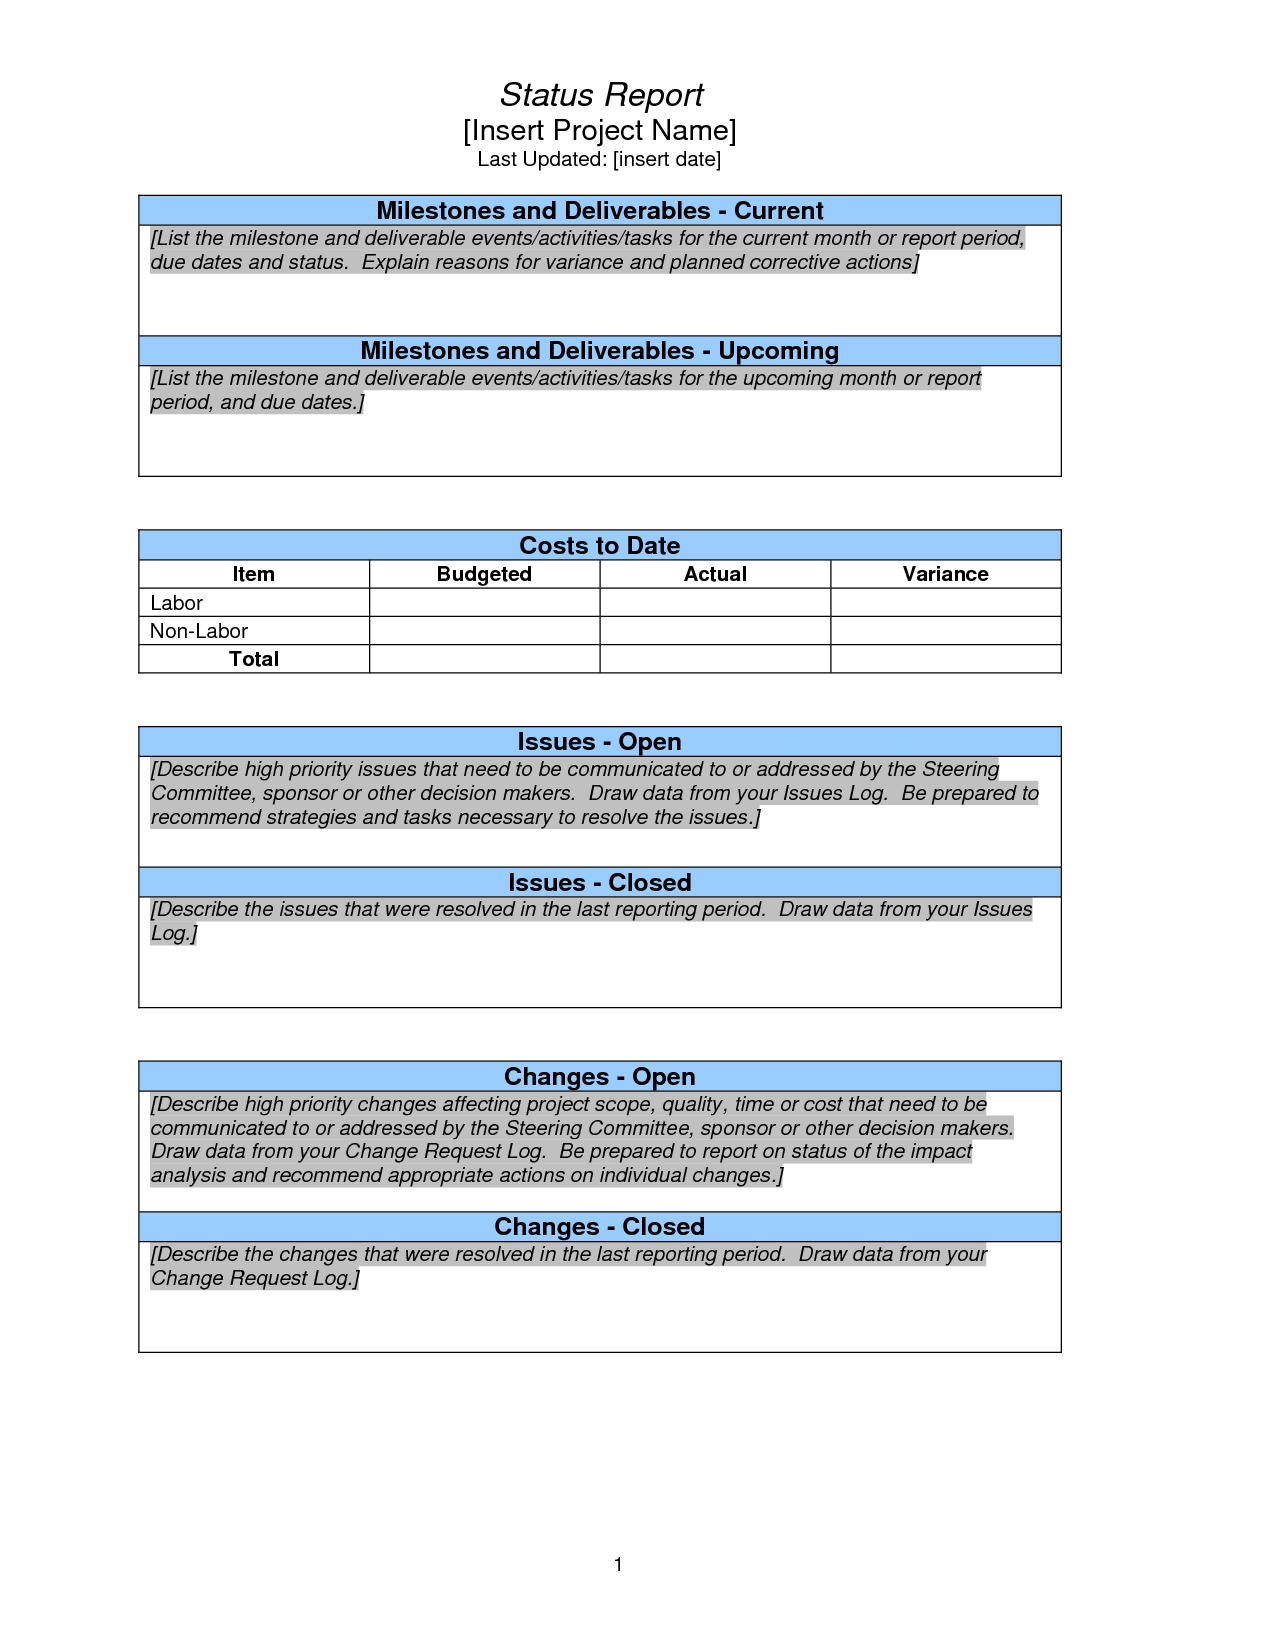 Project Status Report Sample | Project Status Report Throughout Project Analysis Report Template